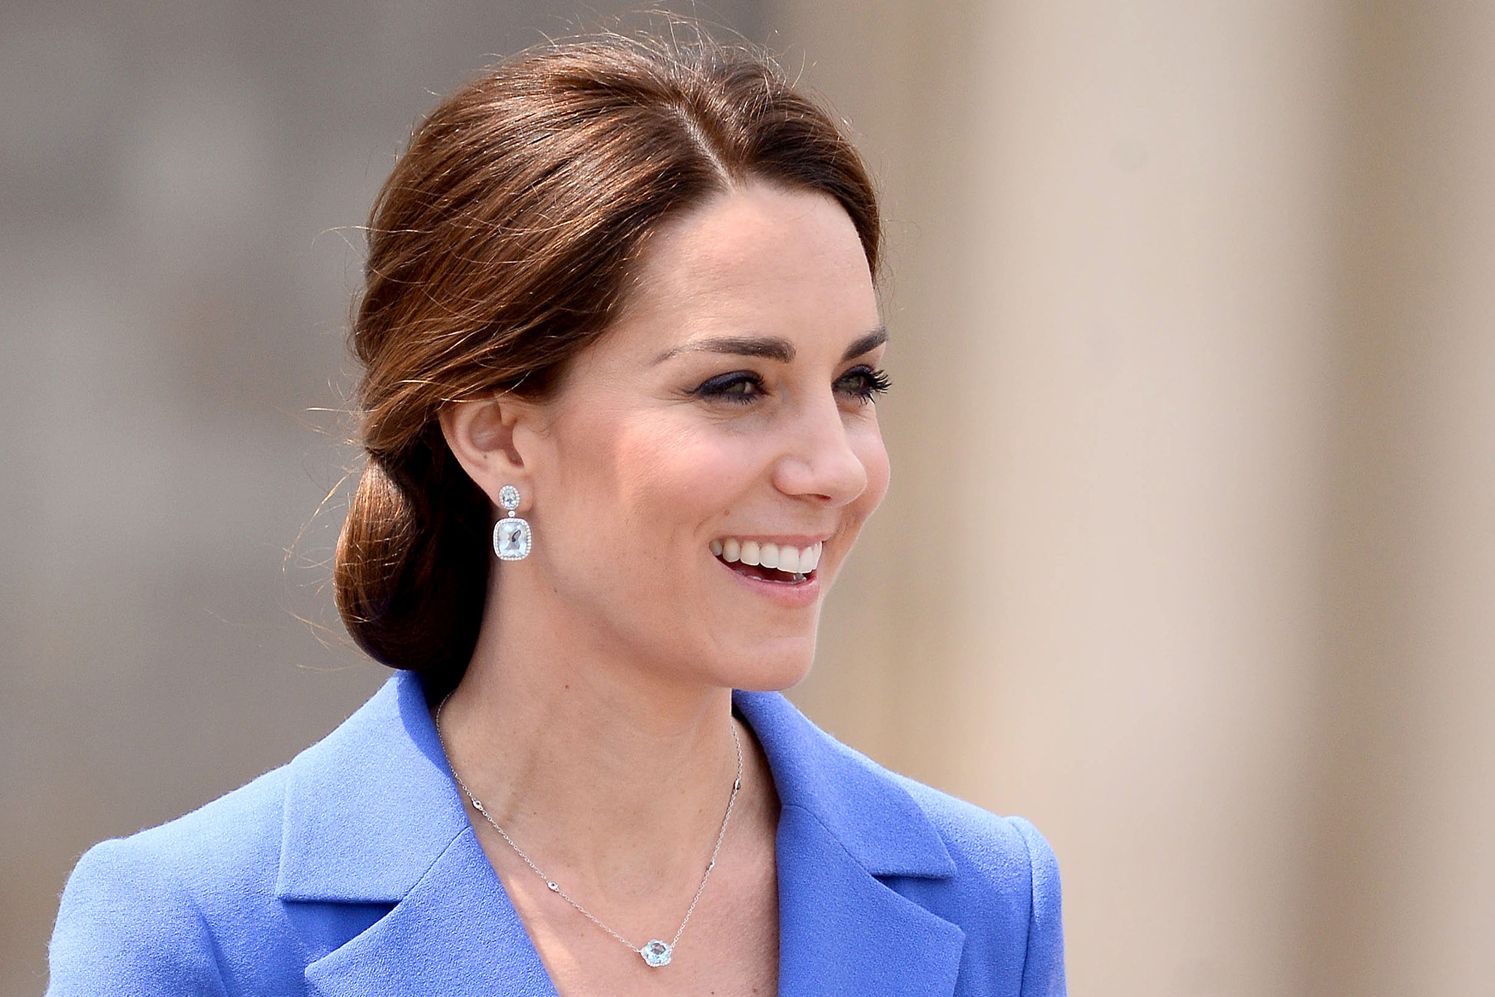 A picure of professionalism - Kate Middleton in Royal Blue